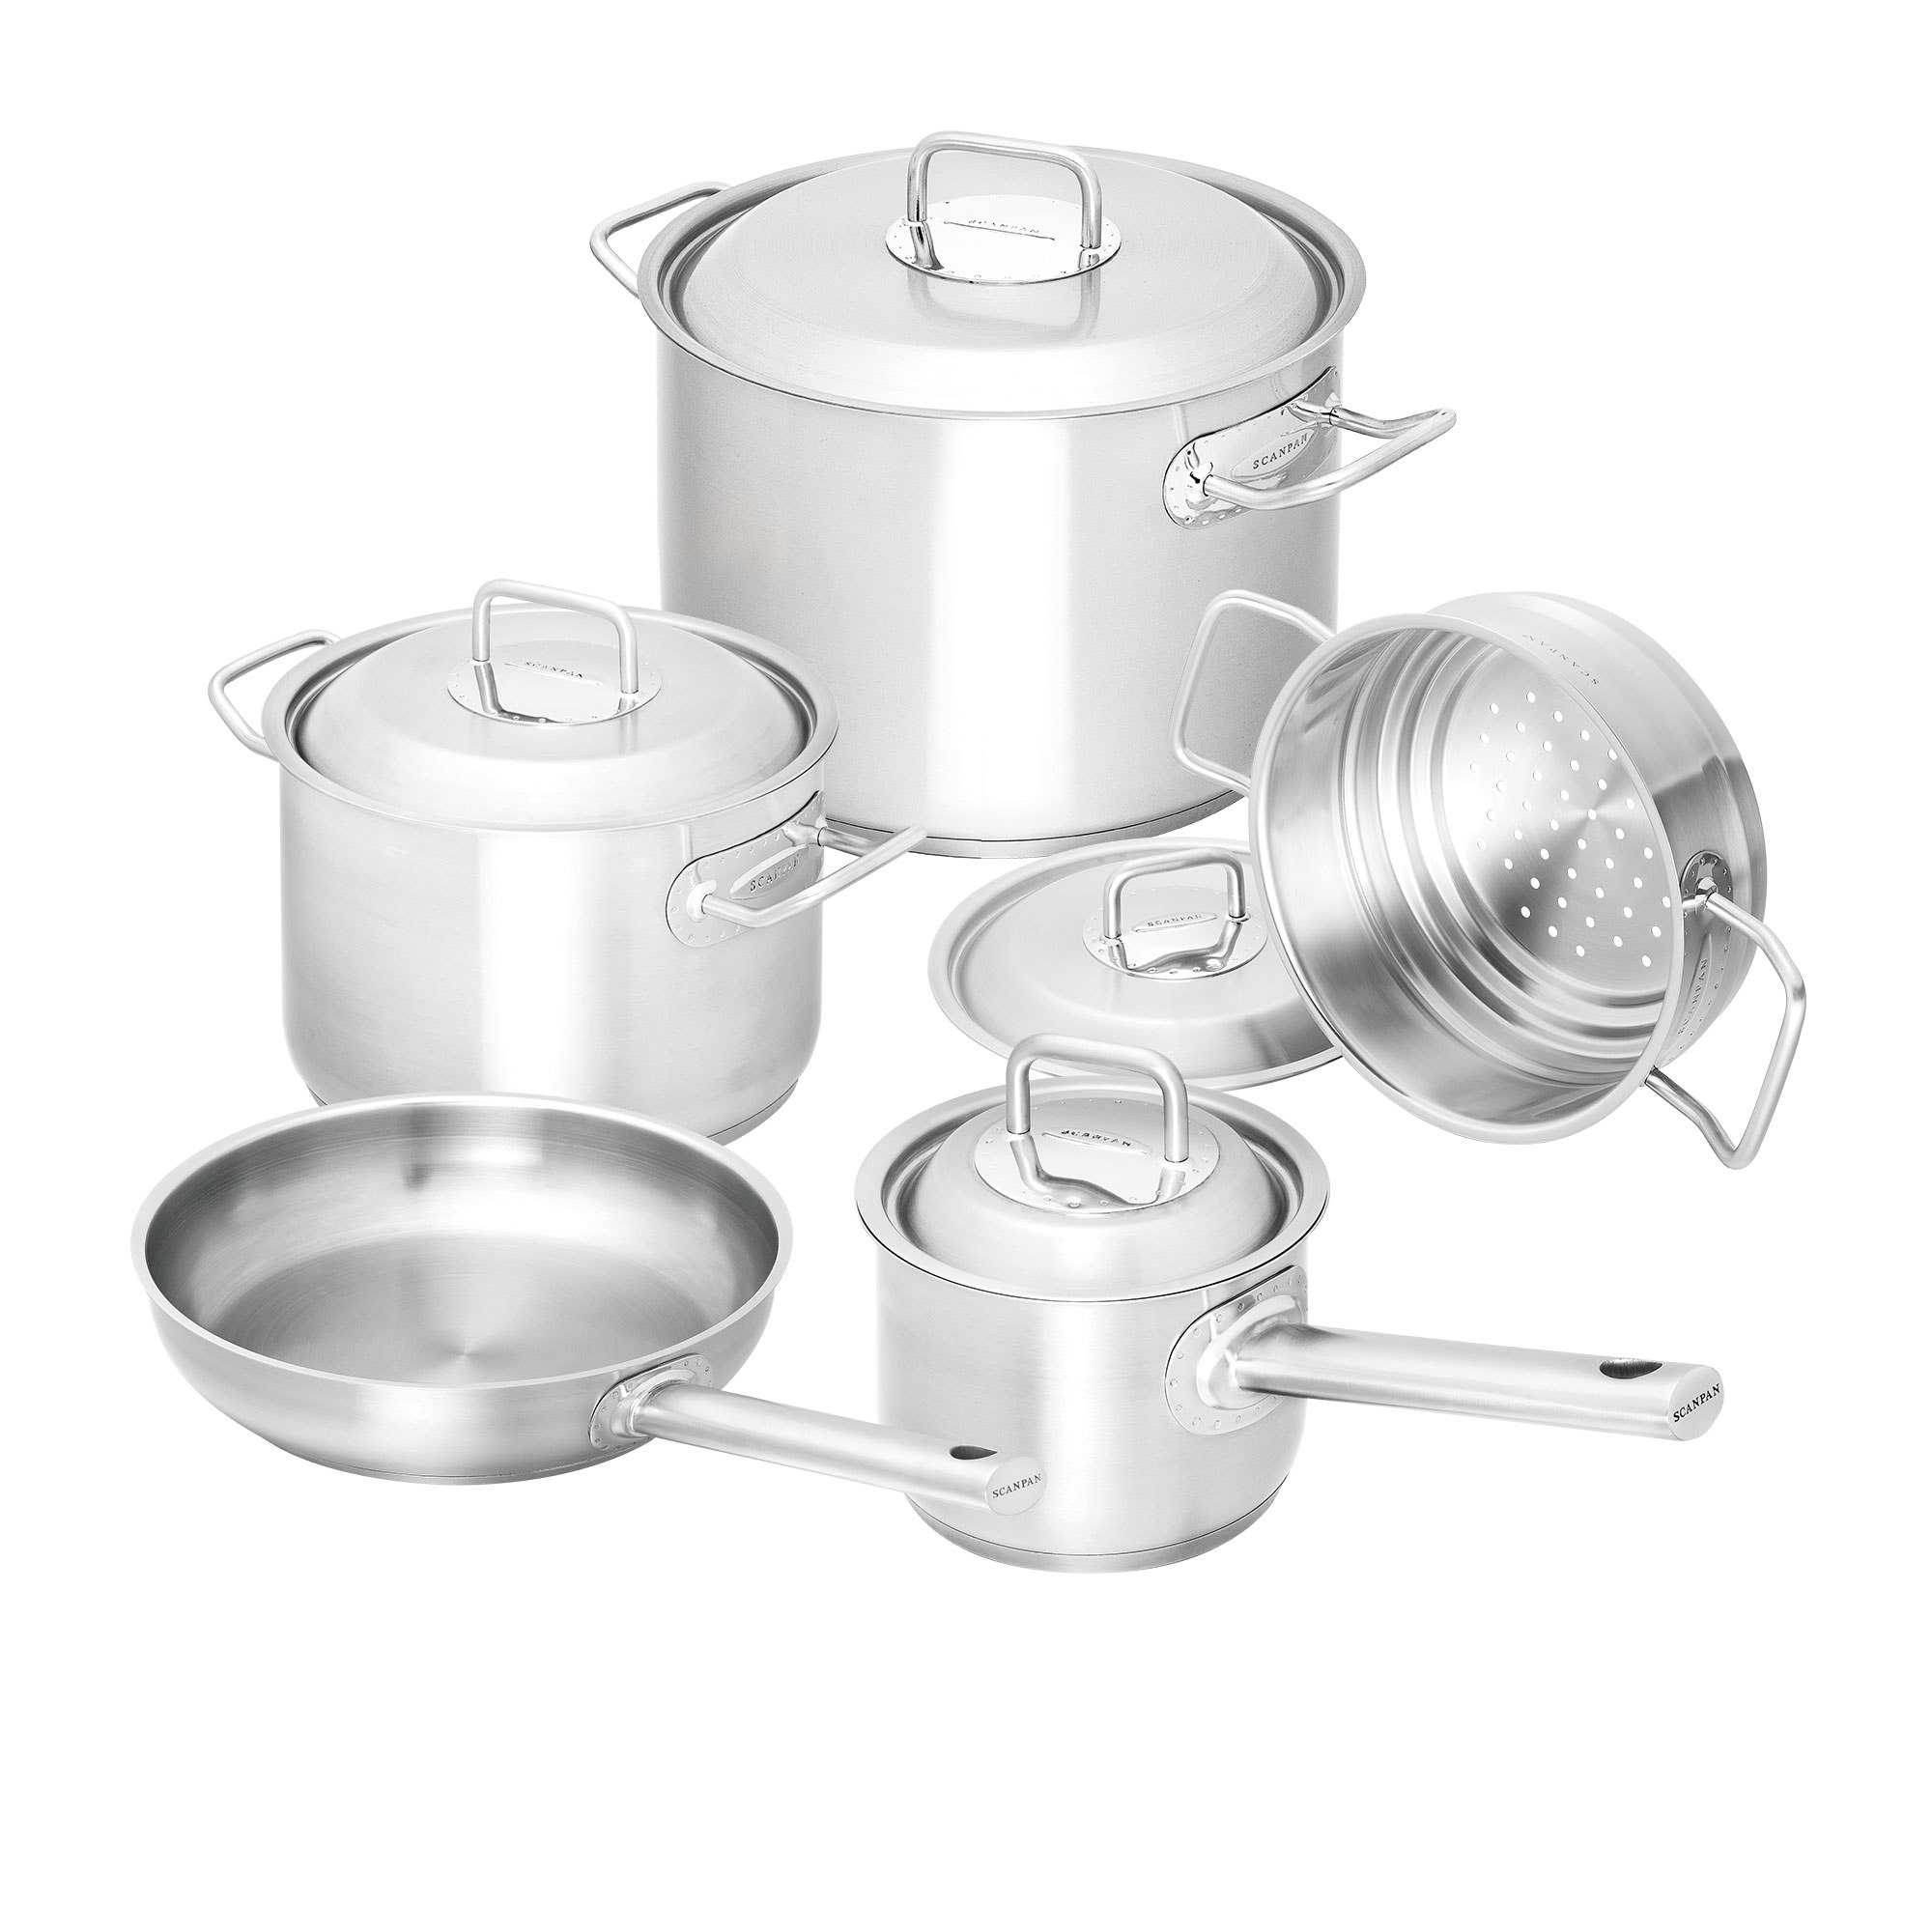 Scanpan Commercial 5pc Stainless Steel Cookware Set Image 1